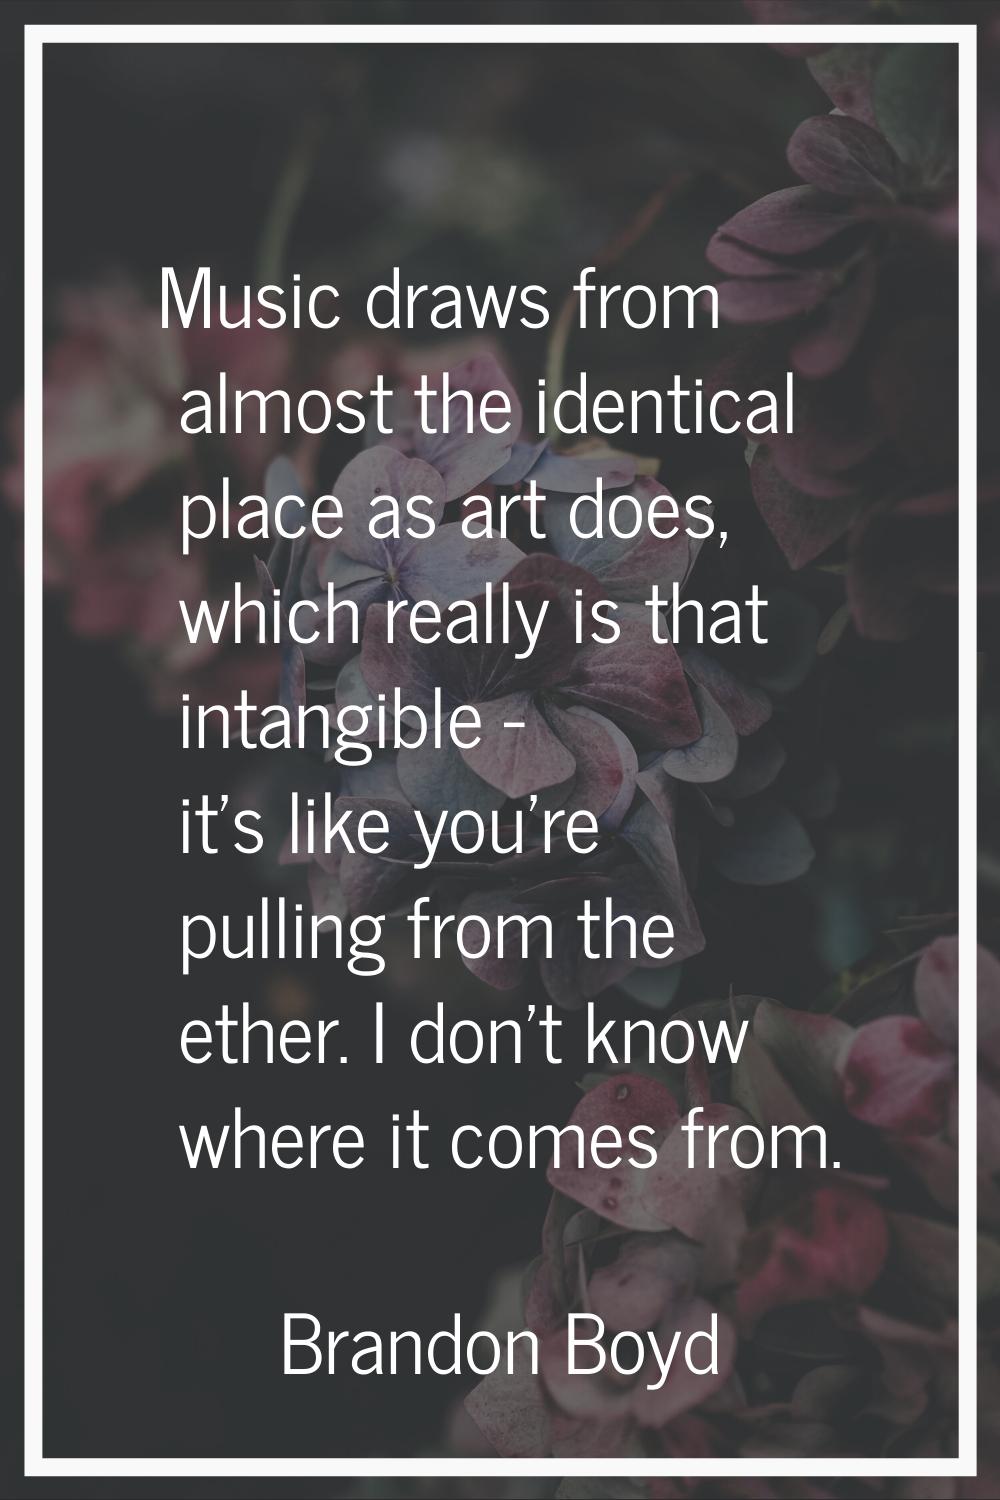 Music draws from almost the identical place as art does, which really is that intangible - it's lik